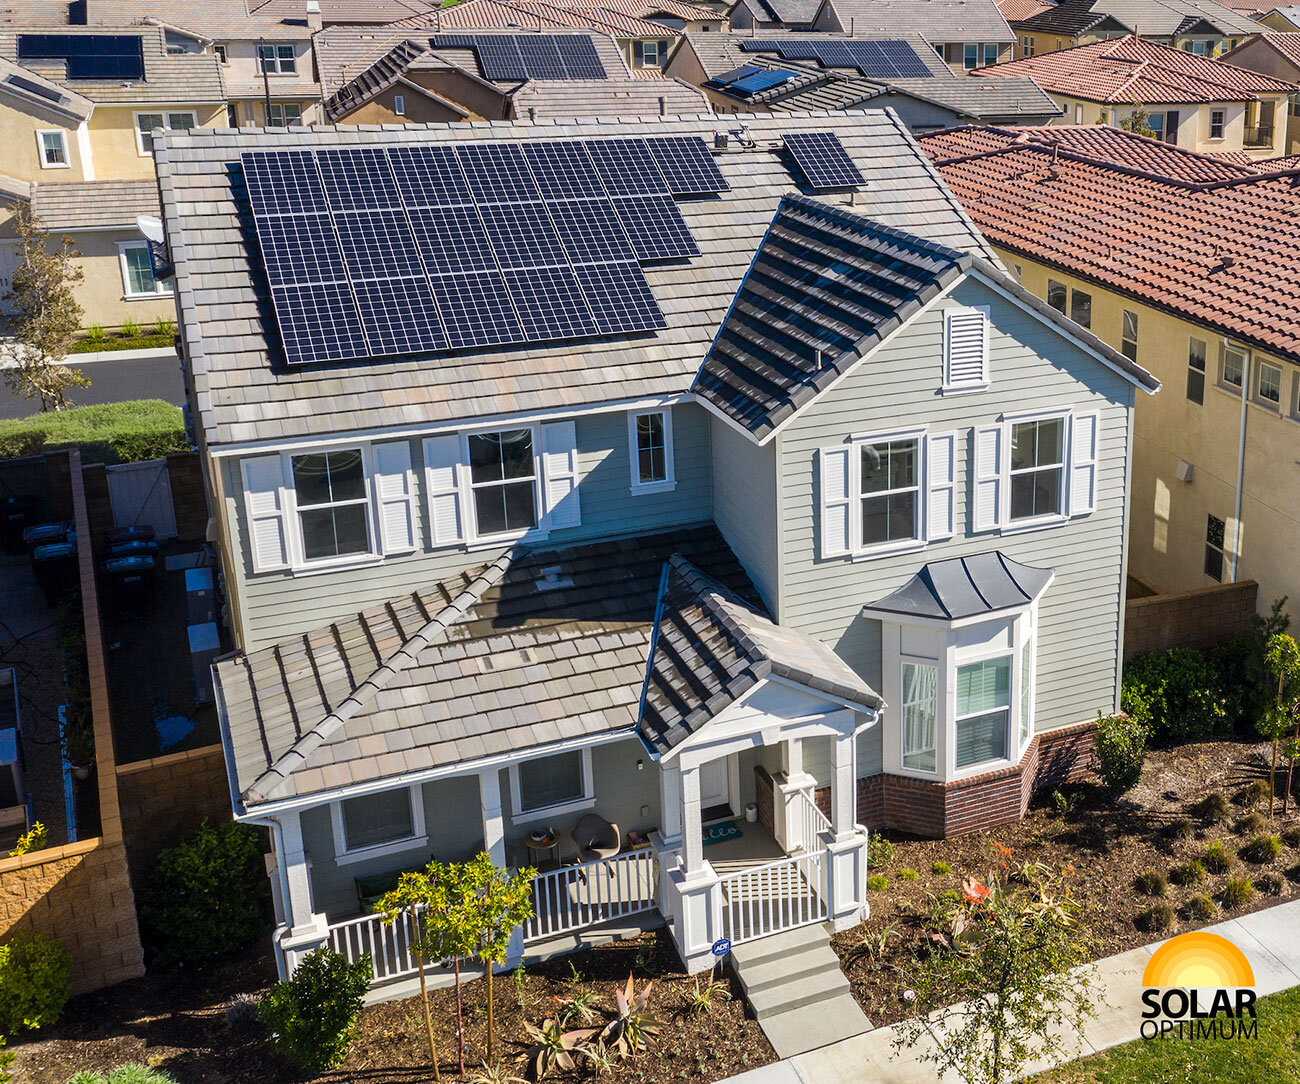 How to Choose the Best San Diego Solar Companies that Will Maximize Your Savings